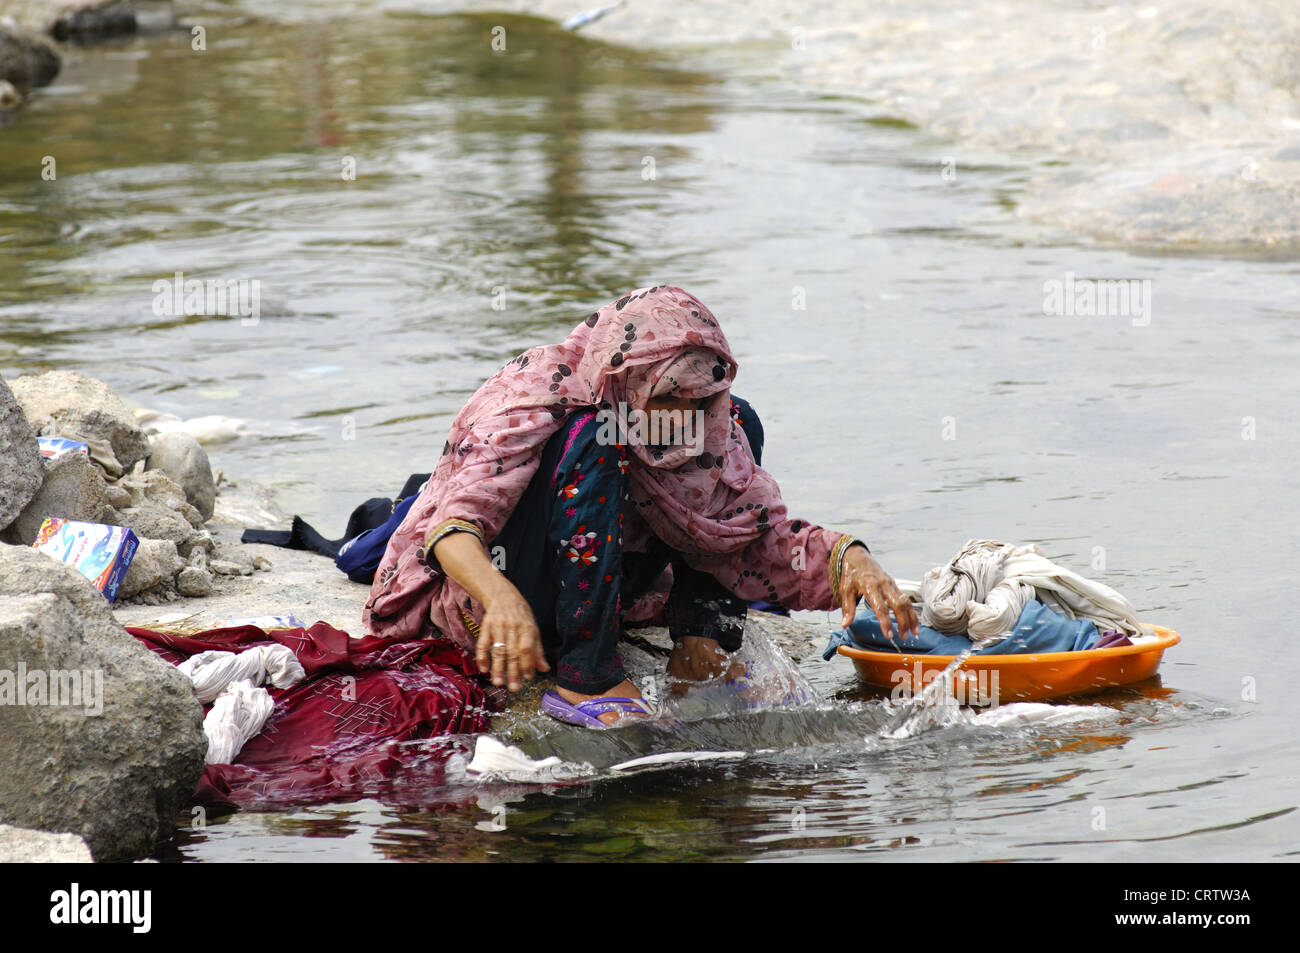 Woman doing her laundry in a river, Oman Stock Photo